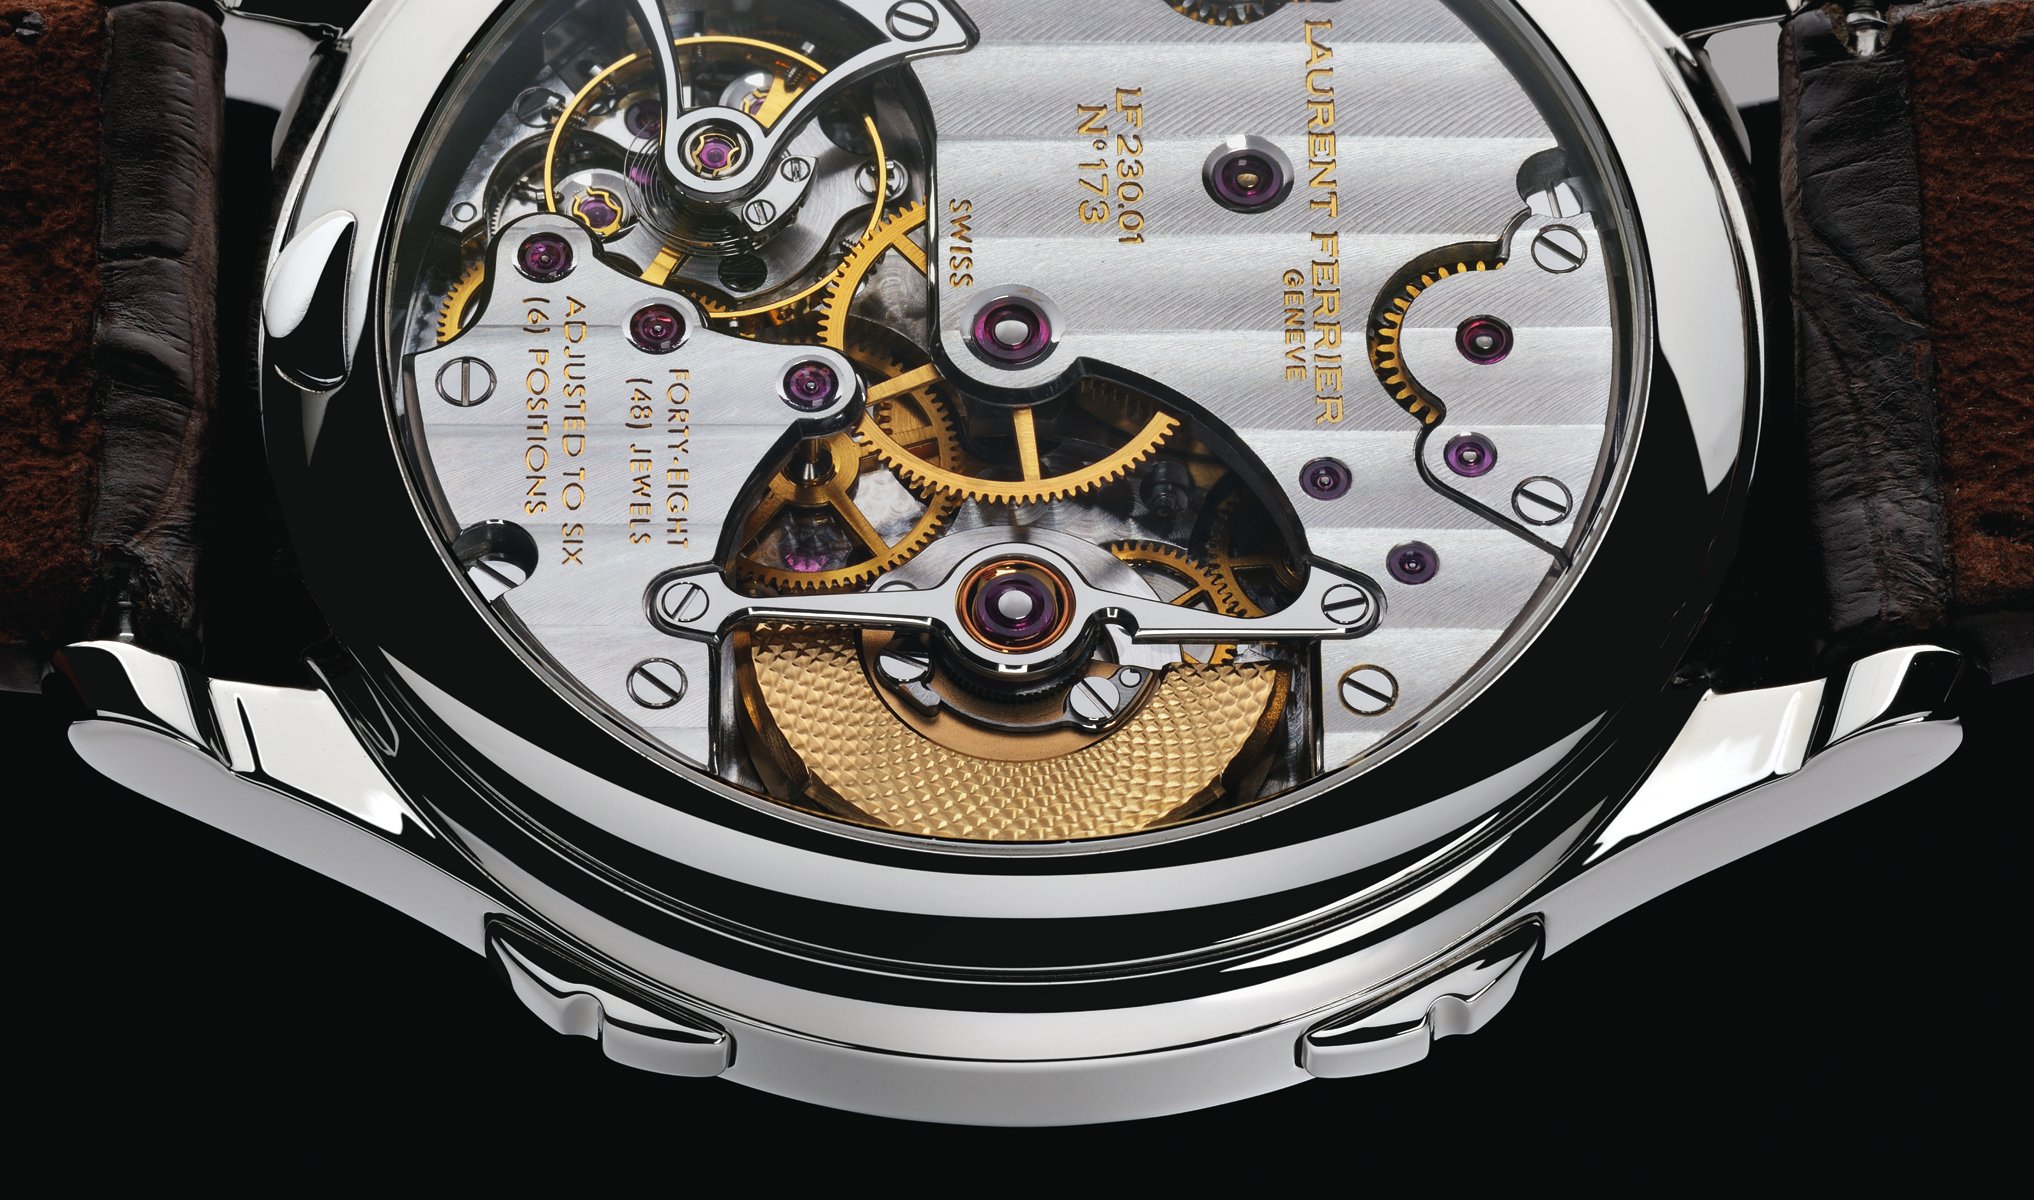 Jean Daniel Nicolas 2-Minute Tourbillon watch mechanism, on white cover of 'Watchmakers', by ACC Art Books.